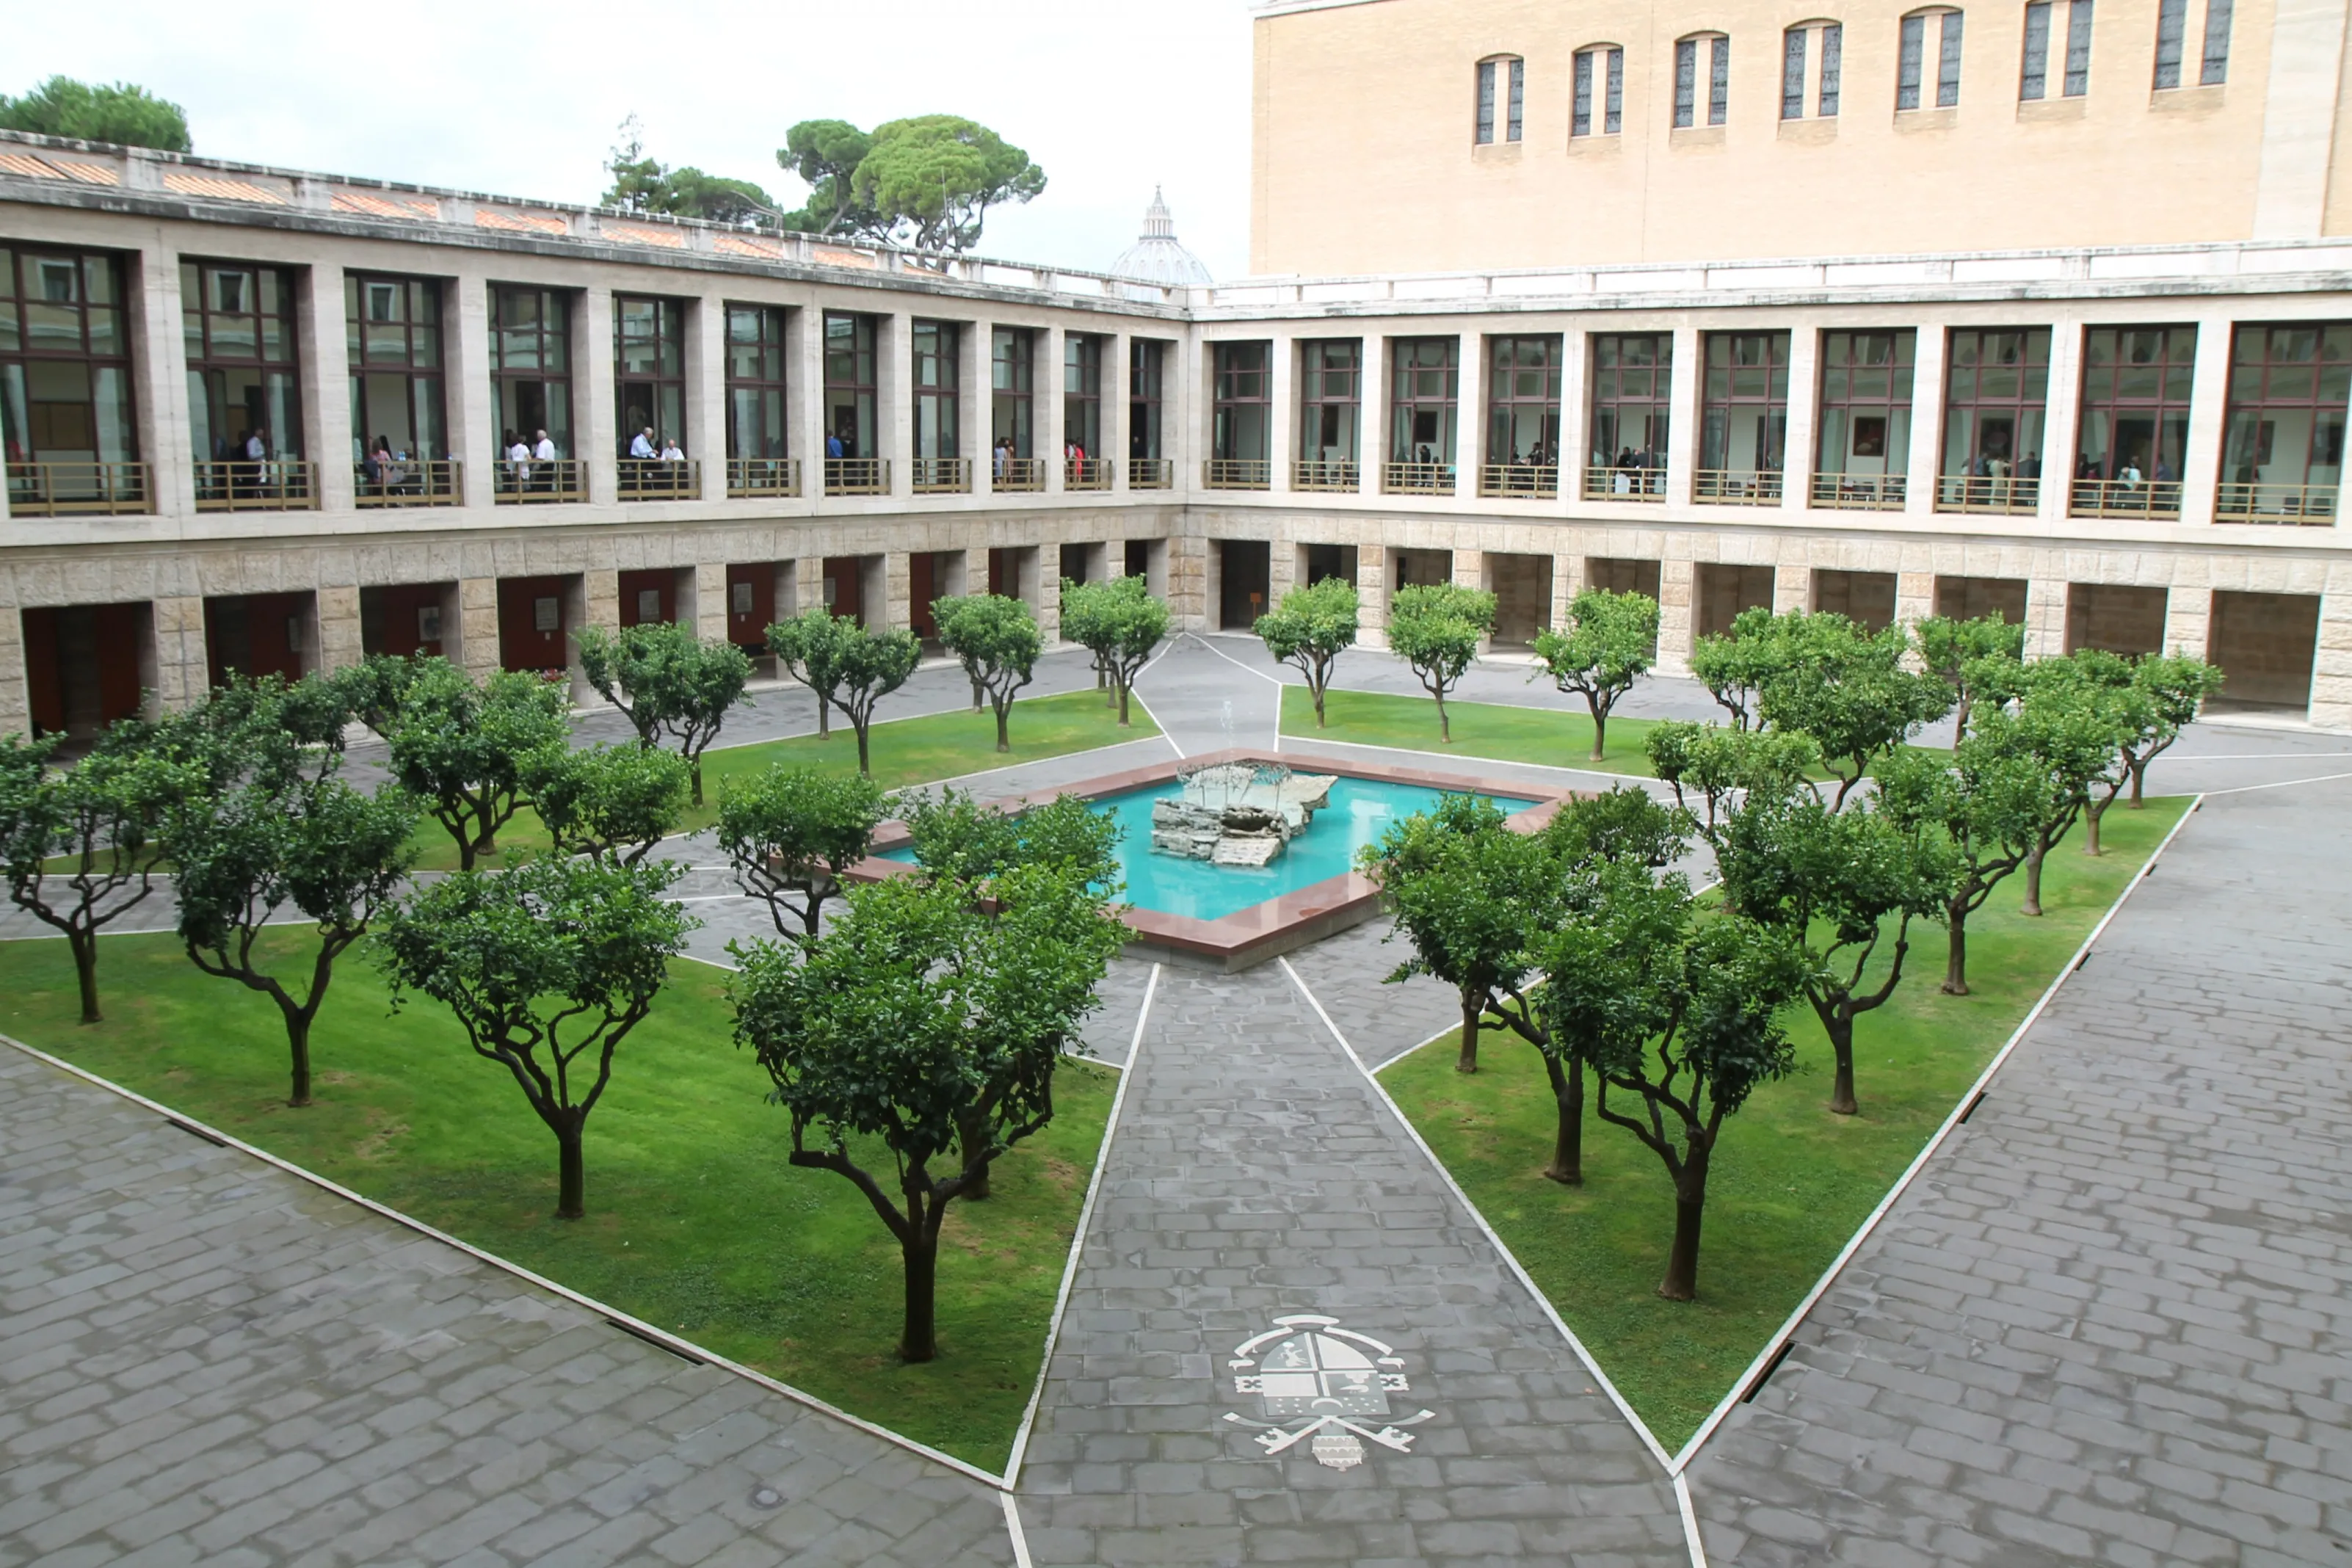 The Pontifical North American College is a major seminary in Rome that educates seminarians from U.S. diocese and elsewhere. / Bohumil Petrik/CNA